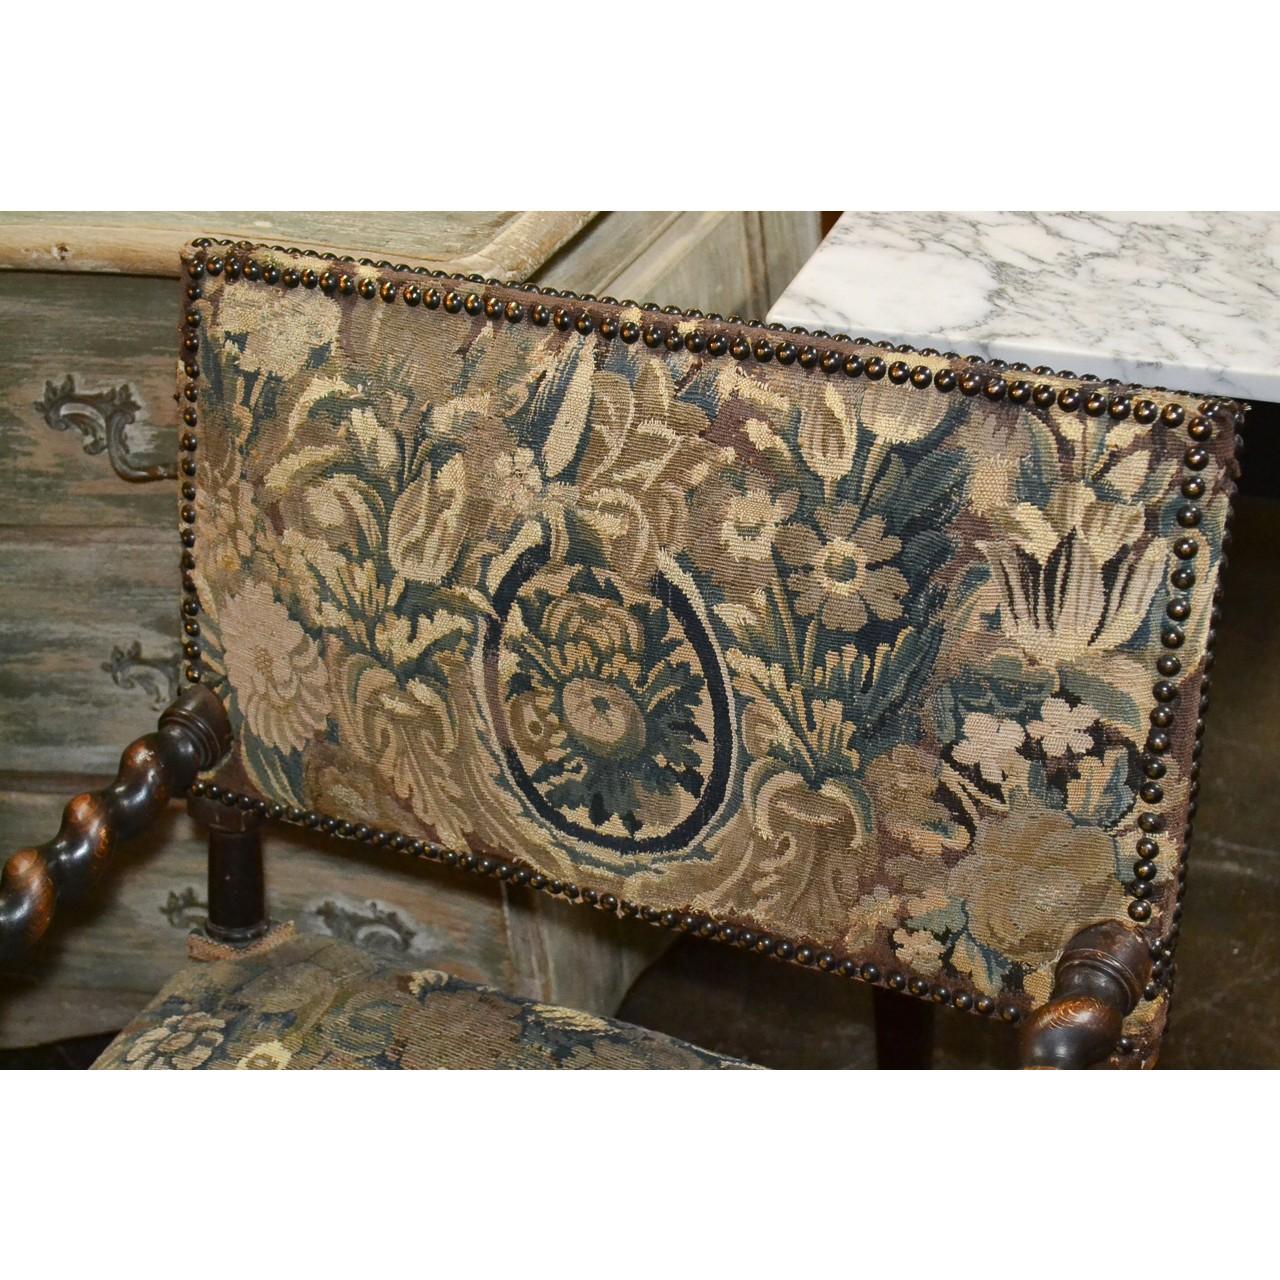 Rare 19th century Franco Flemish baroque carved walnut armchair with fine verdure tapestry upholstery accented with brass tacking. Barley twist frame and stretcher with unique figural carvings at the arms of superb detail,

circa 1890.